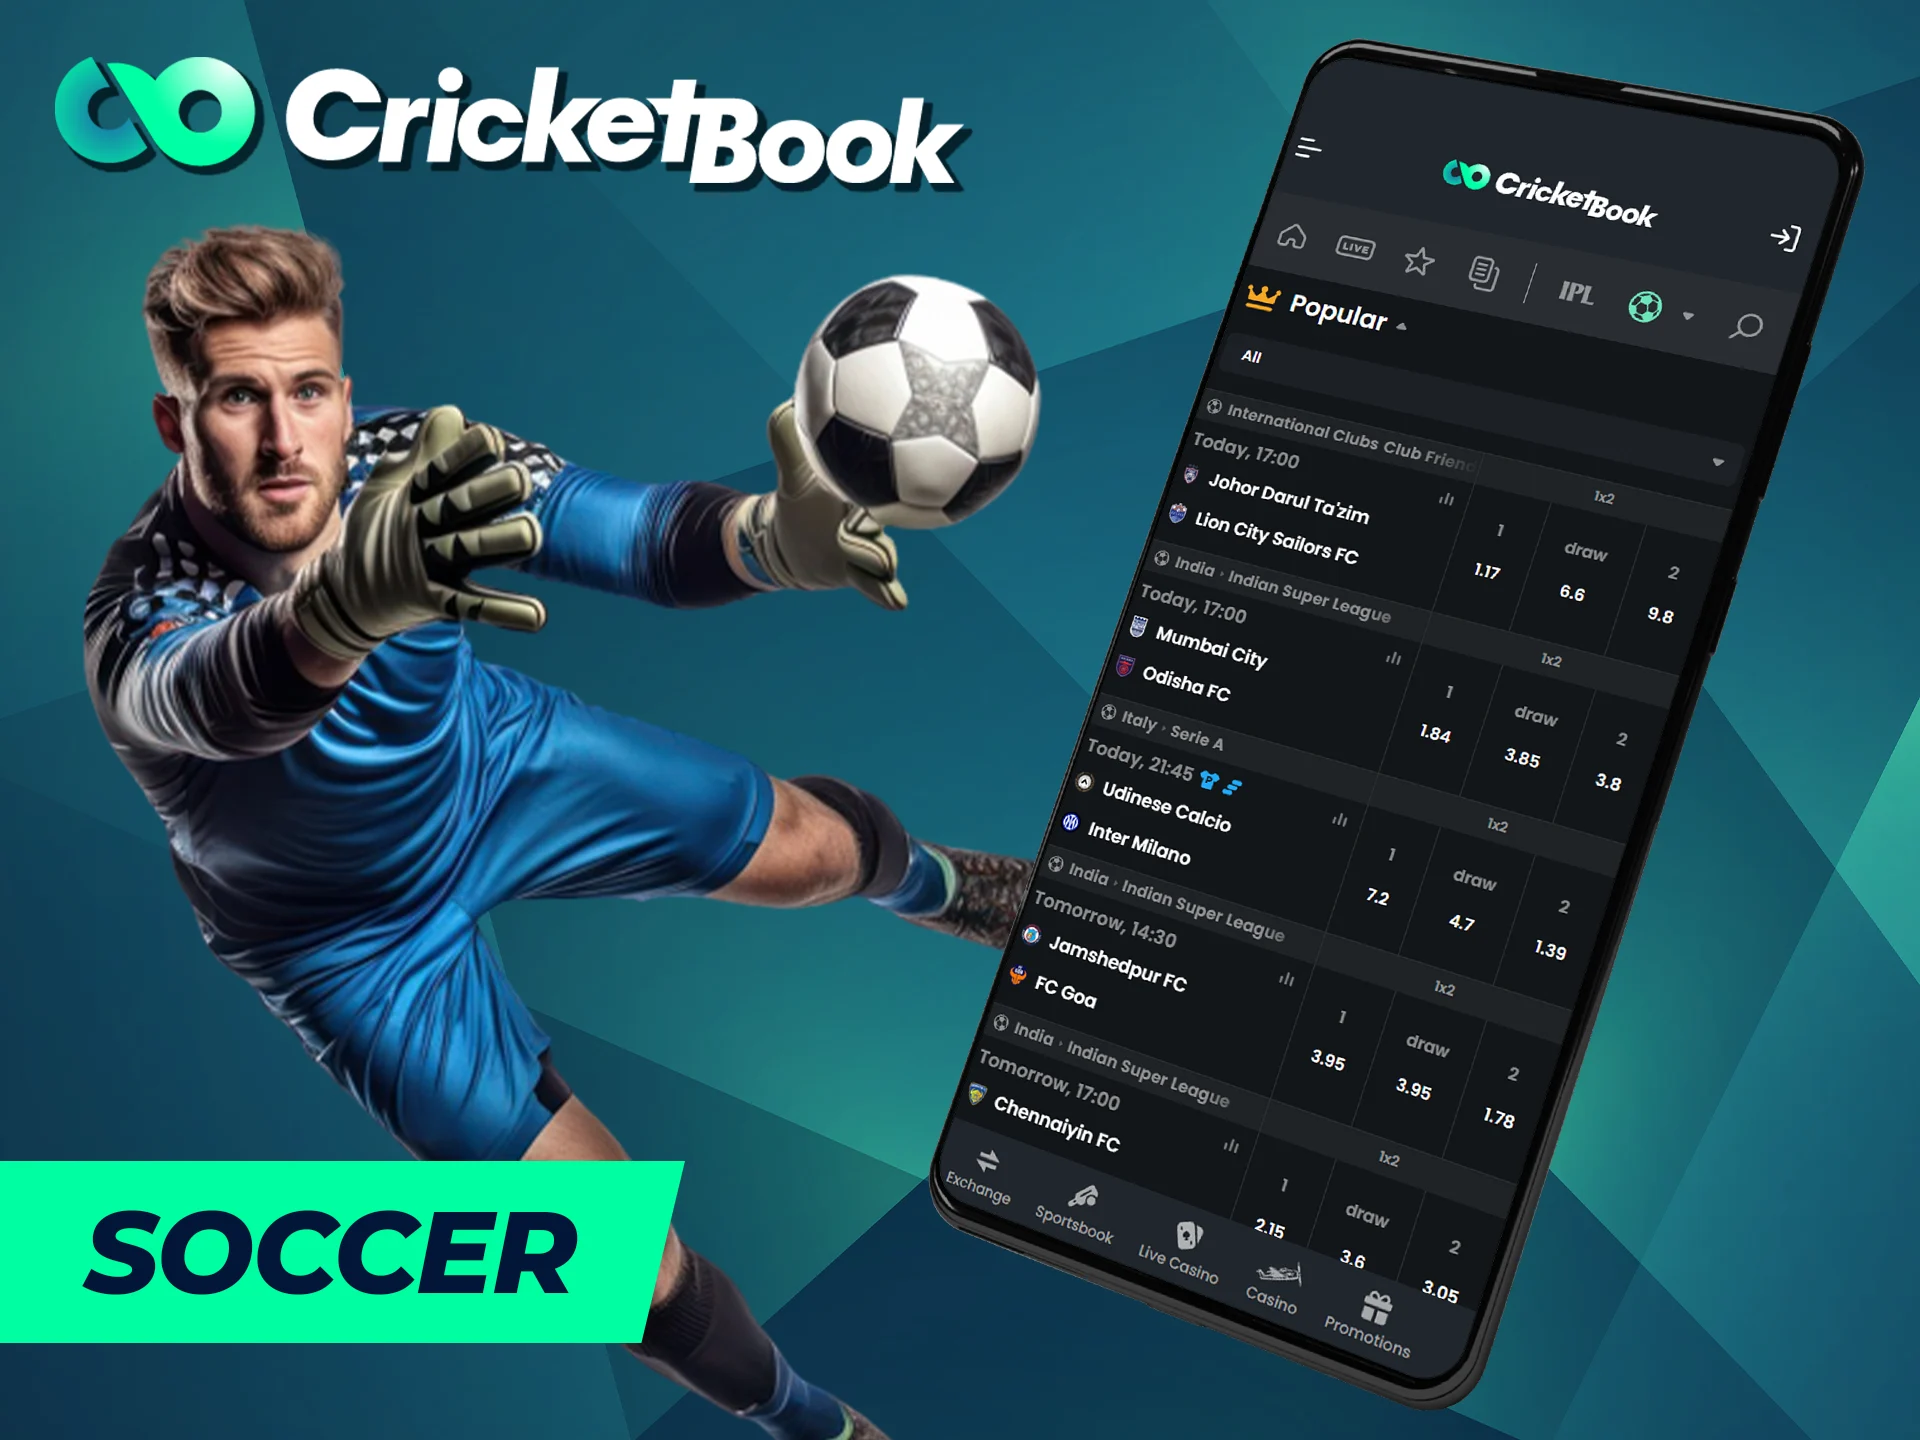 The CricketBook app allows you to bet on soccer.